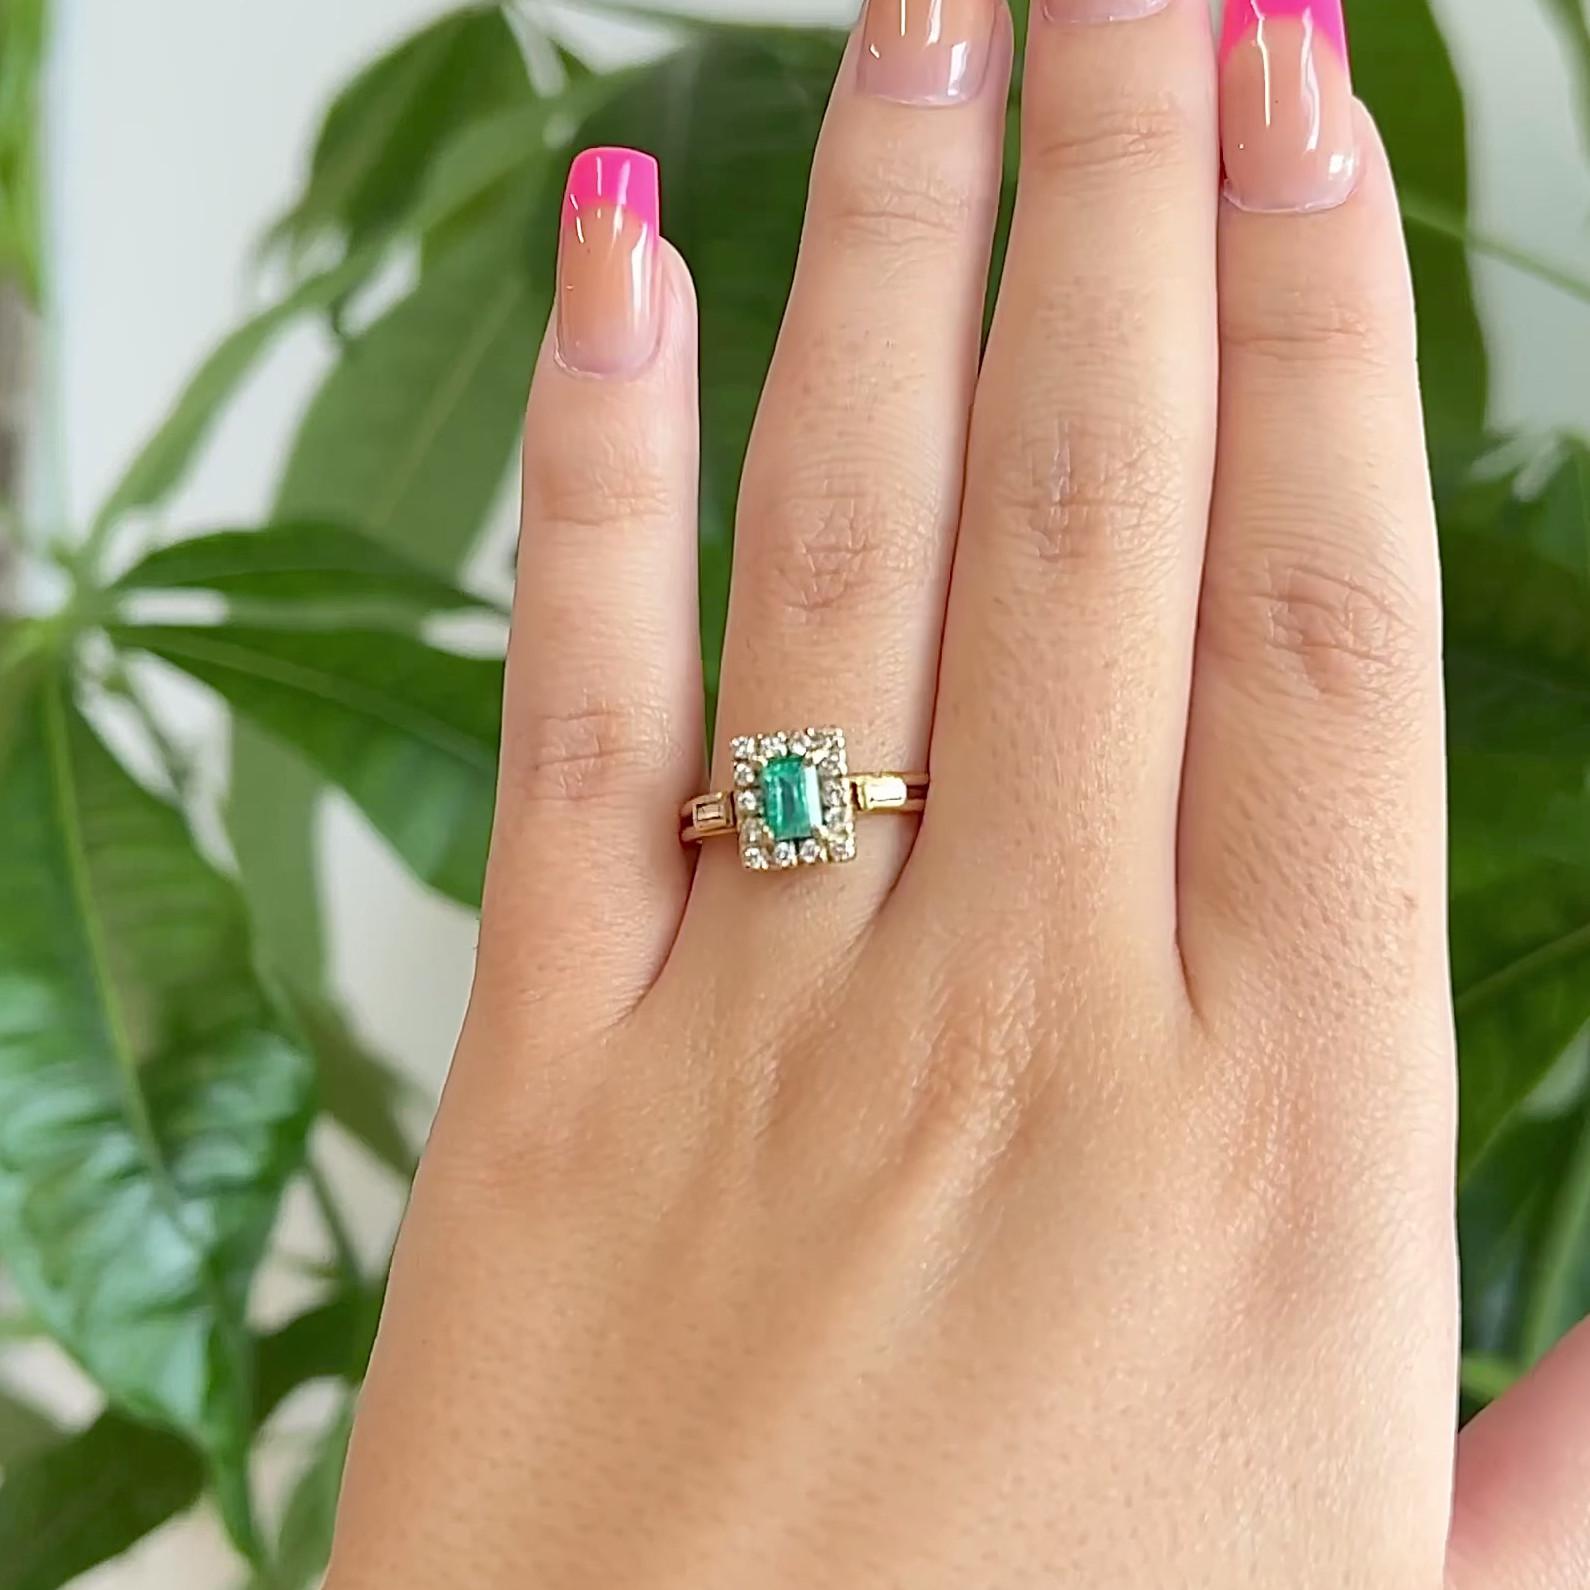 One Vintage Emerald Diamond Yellow Gold Ring. Featuring one rectangular step cut emerald of approximately 0.50 carat. Accented by 14 round brilliant cut diamonds with a total weight of approximately 0.20 carat, graded F color, VS-SI clarity.